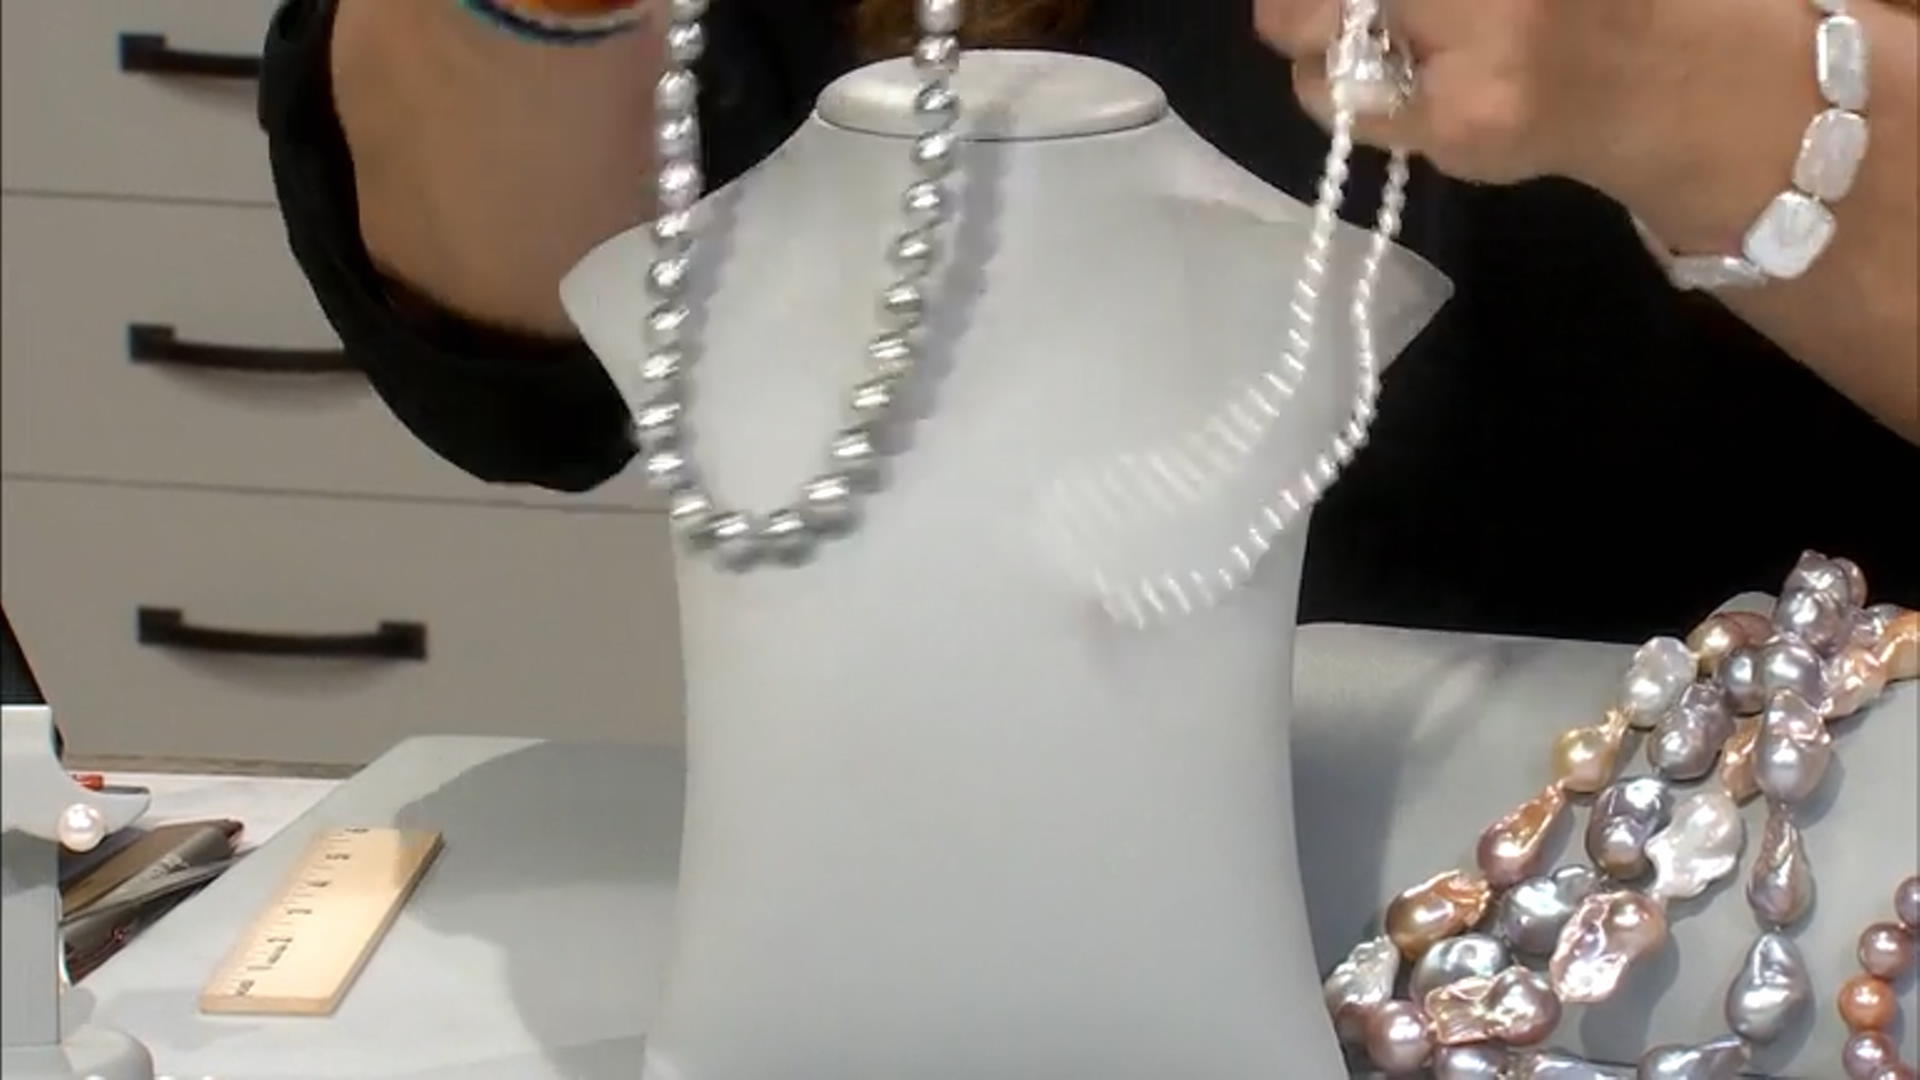 Platinum Cultured Tahitian Pearl Rhodium Over Sterling Silver 18 Inch Strand Necklace Video Thumbnail